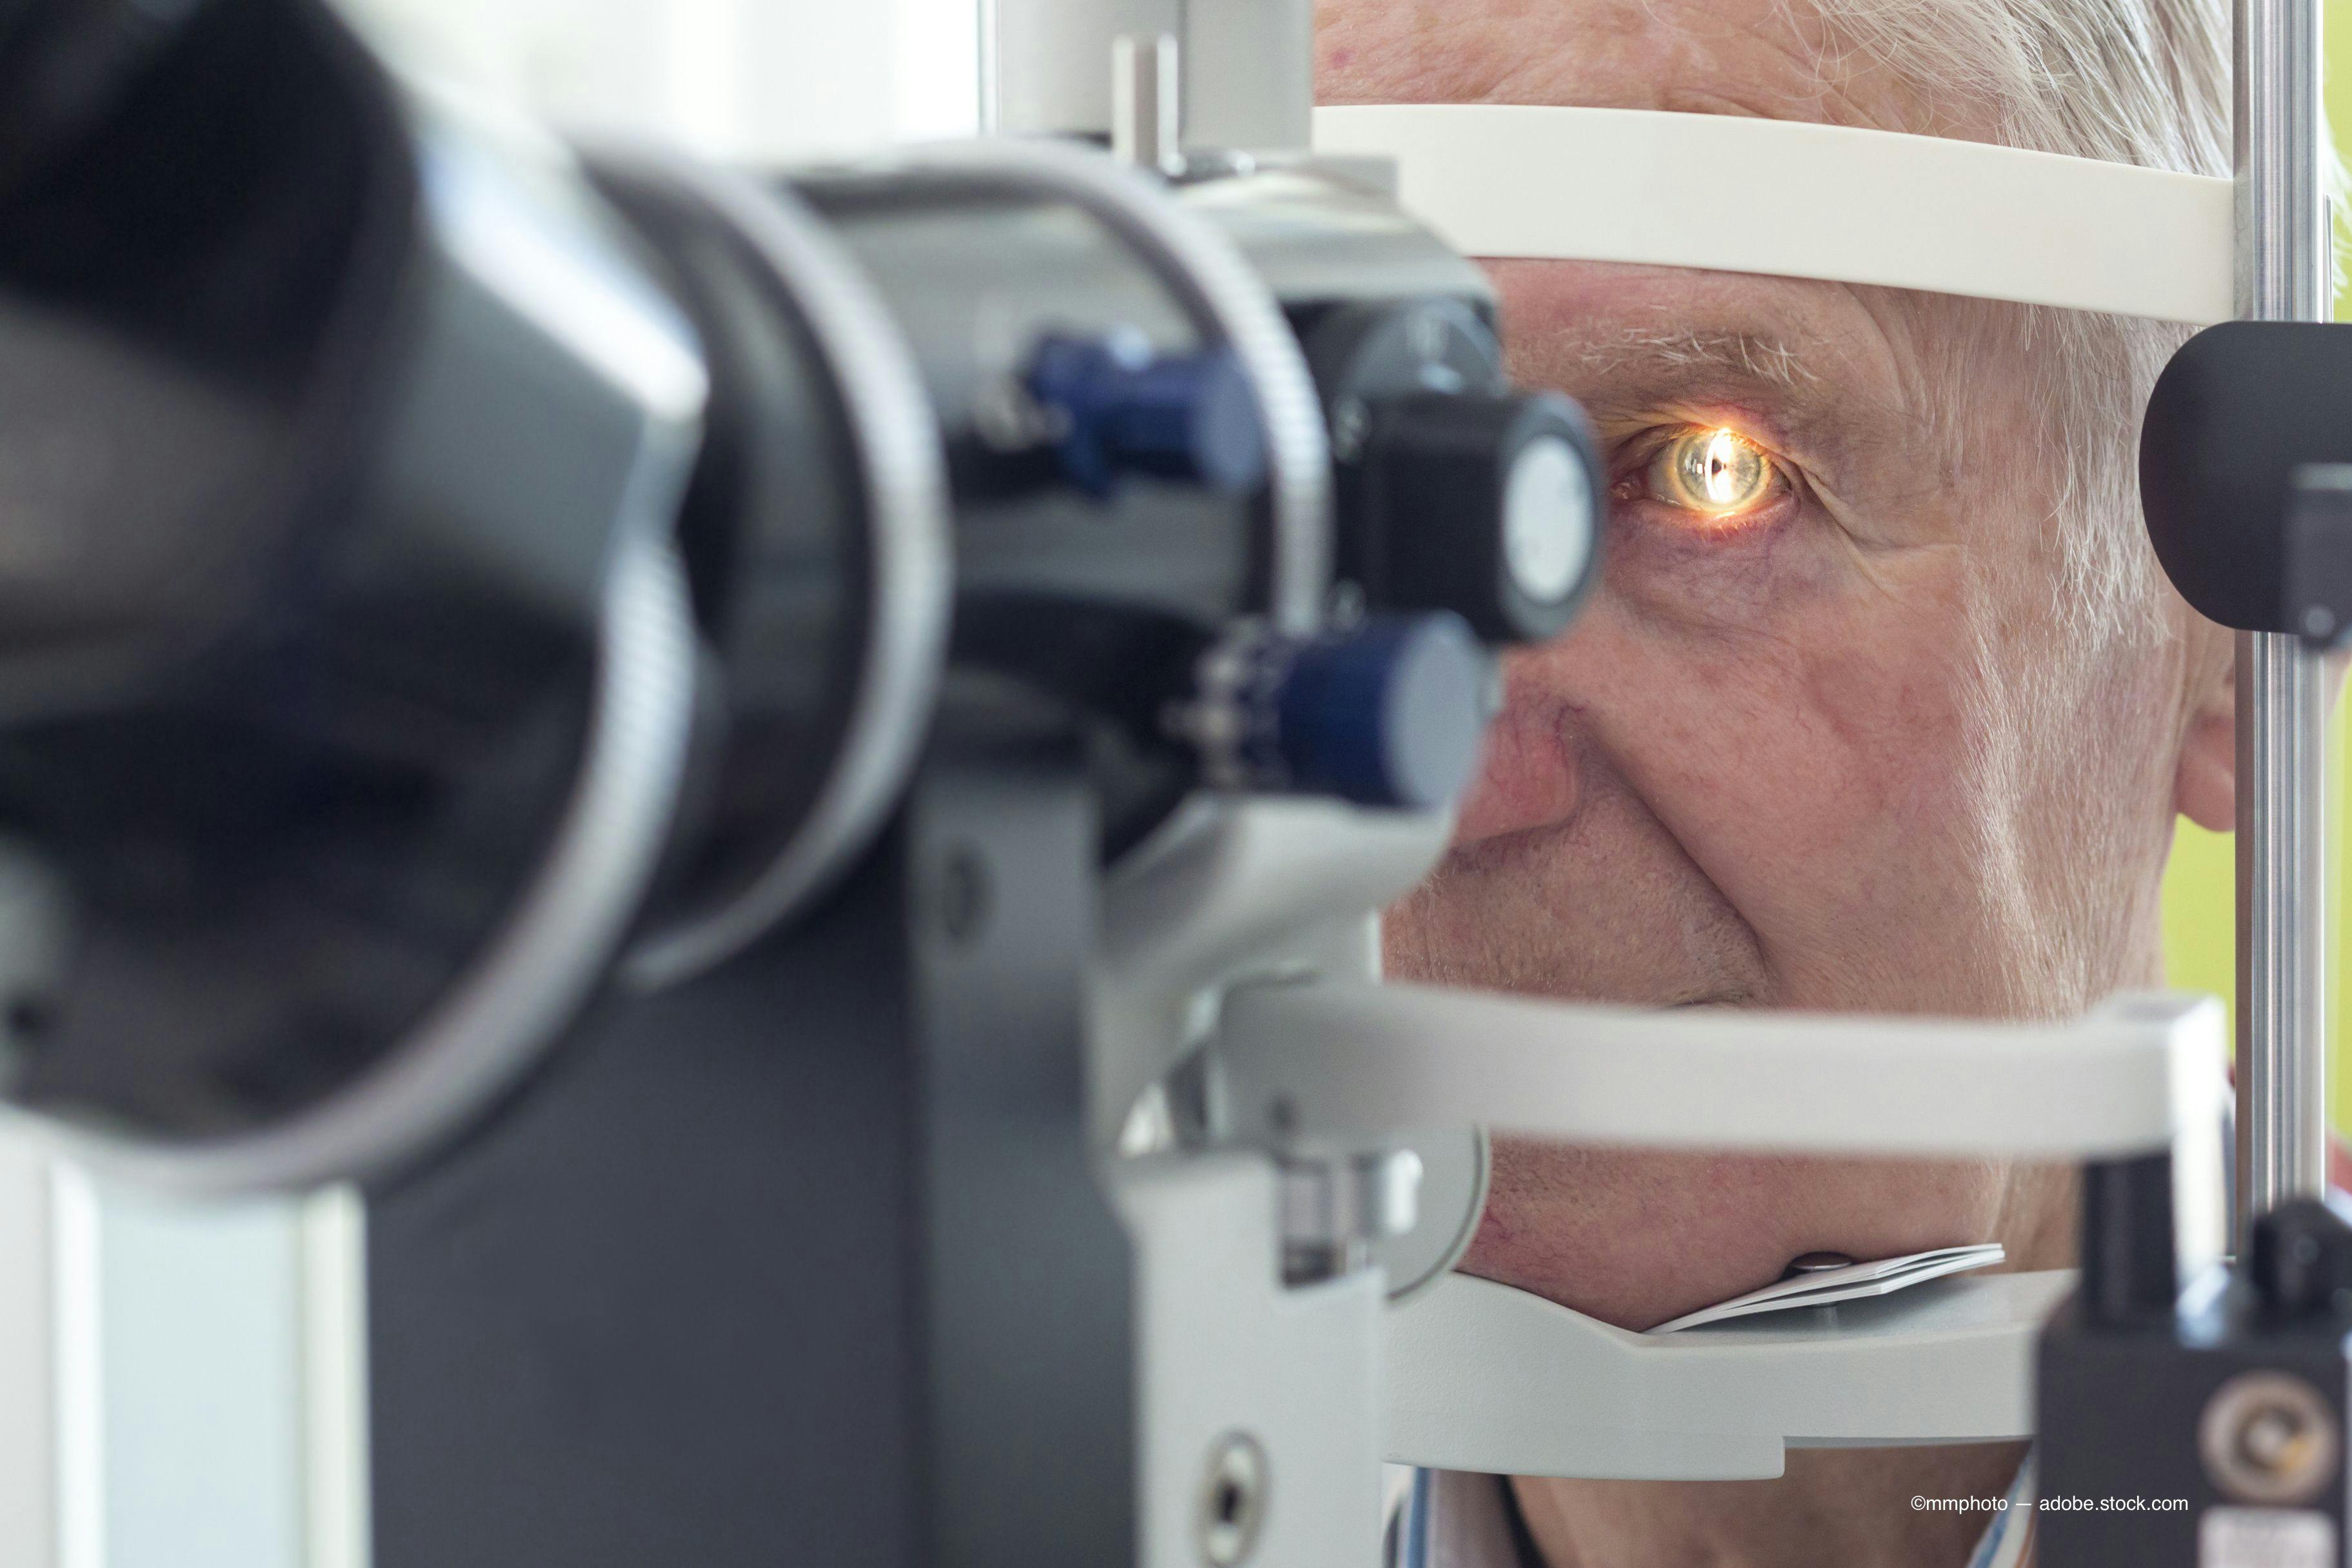 5 easy steps in cataract co-management